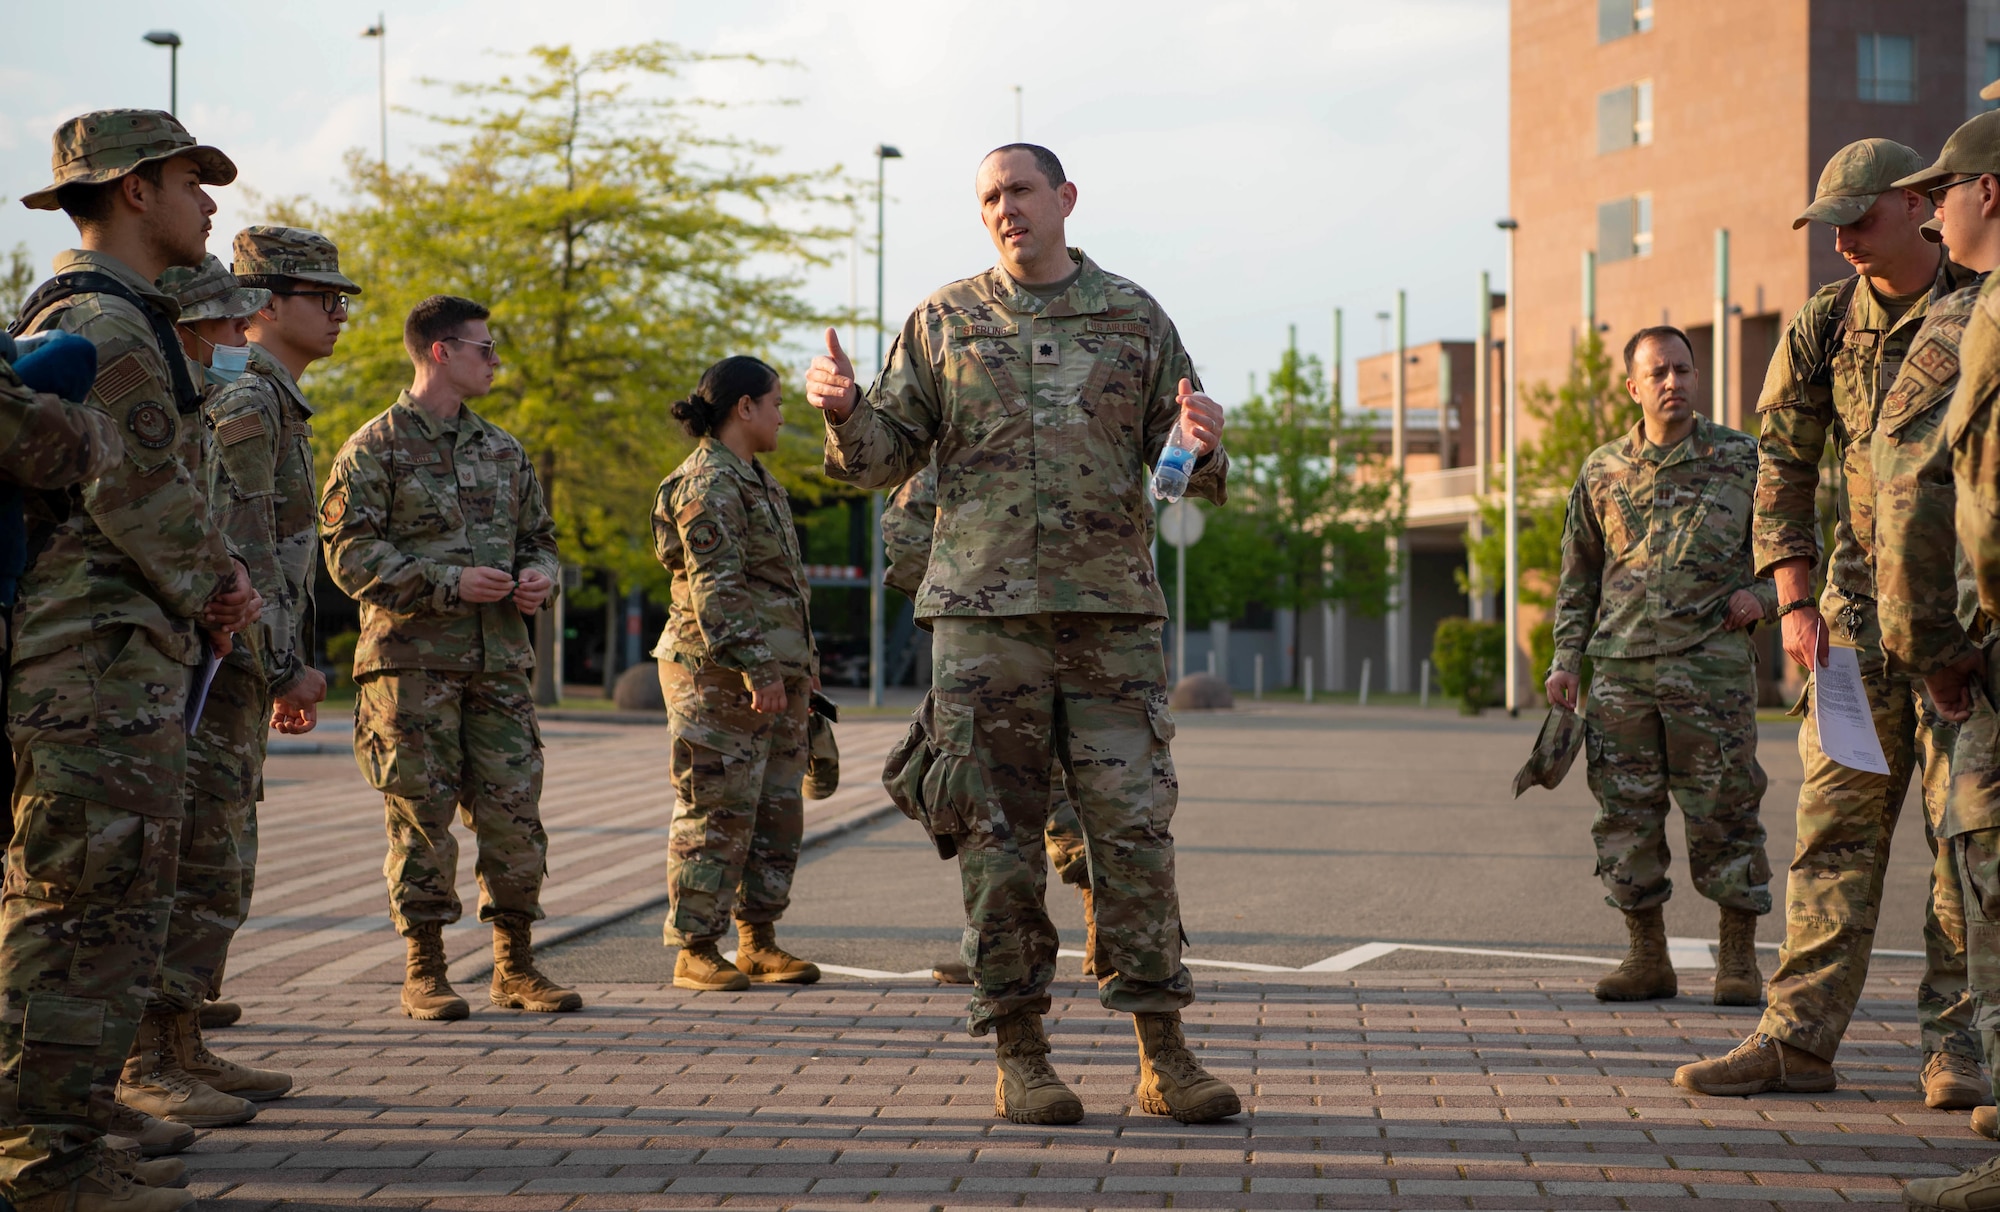 U.S. Air Force Lt. Col. Kenneth Sterling, 86th Mission Support Squadron Detachment 1 Deployment Transition Center commander, greets and reviews safety procedures for the redeployers at Ramstein Air Base, Germany, May 3, 2022.